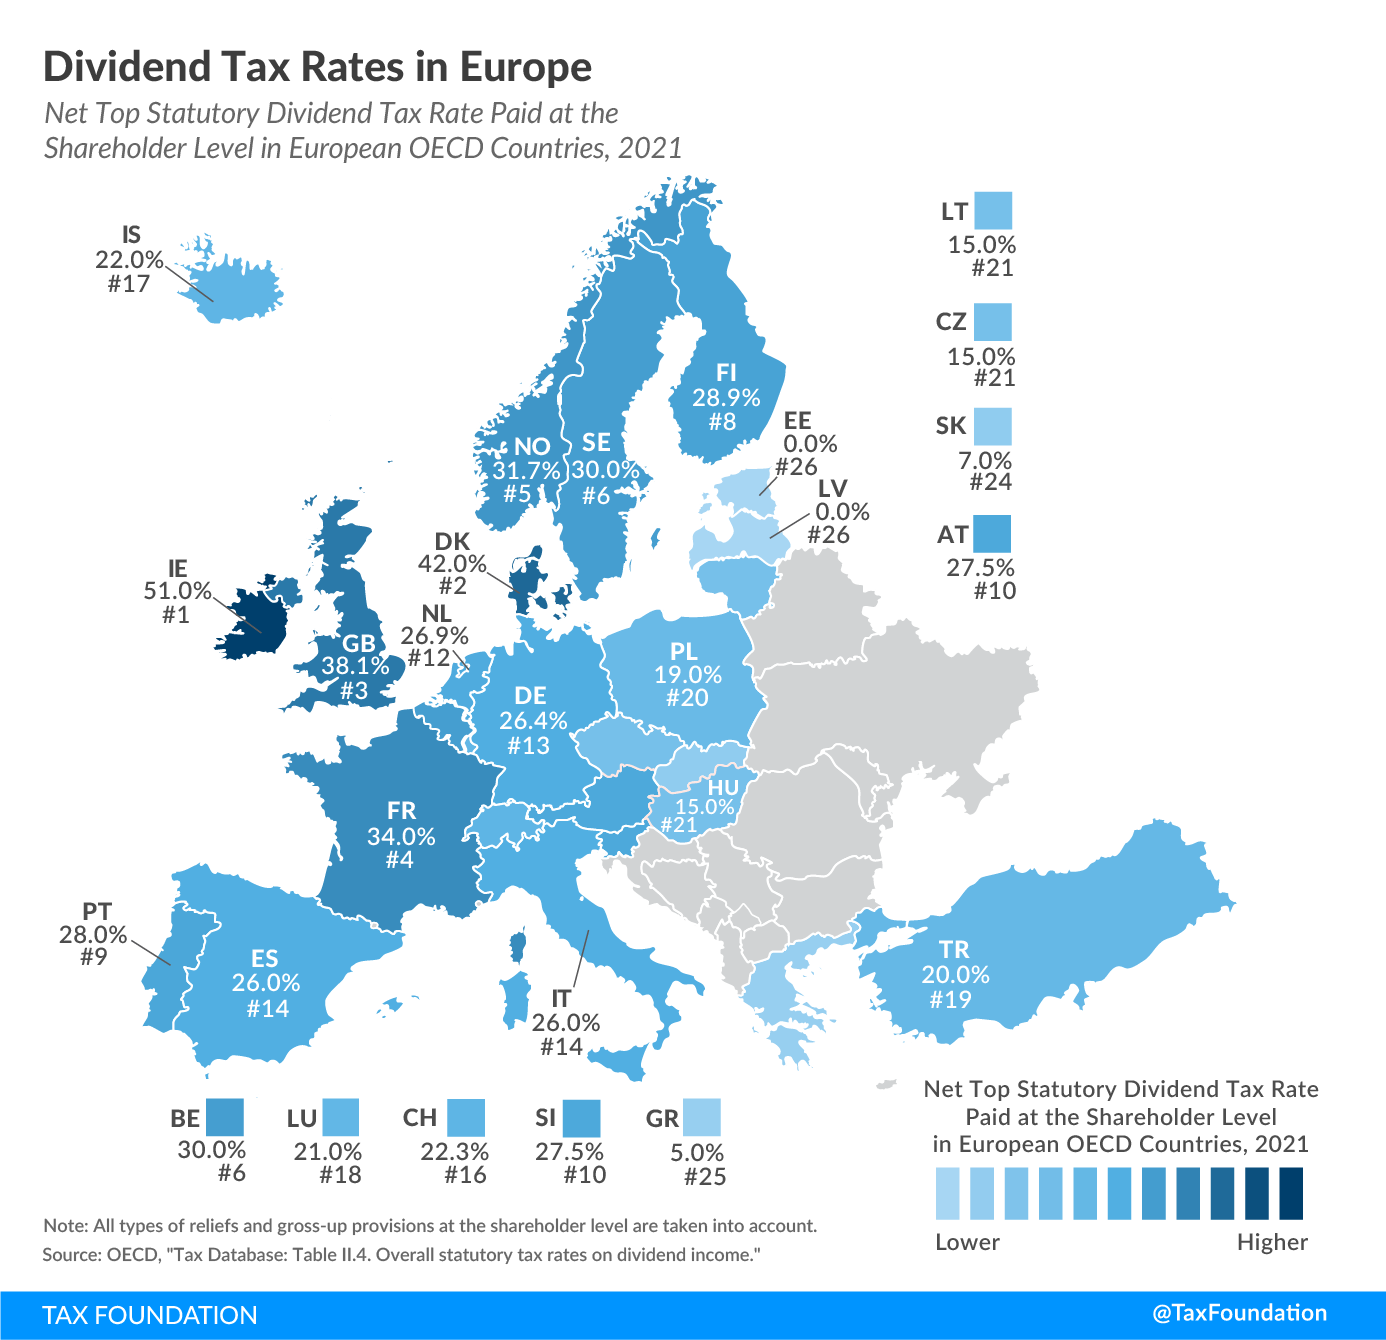 Dividend tax rate 2021 dividend tax rates in Europe Capital Gains and Dividend Taxes Europe rankings how dividend income is taxed